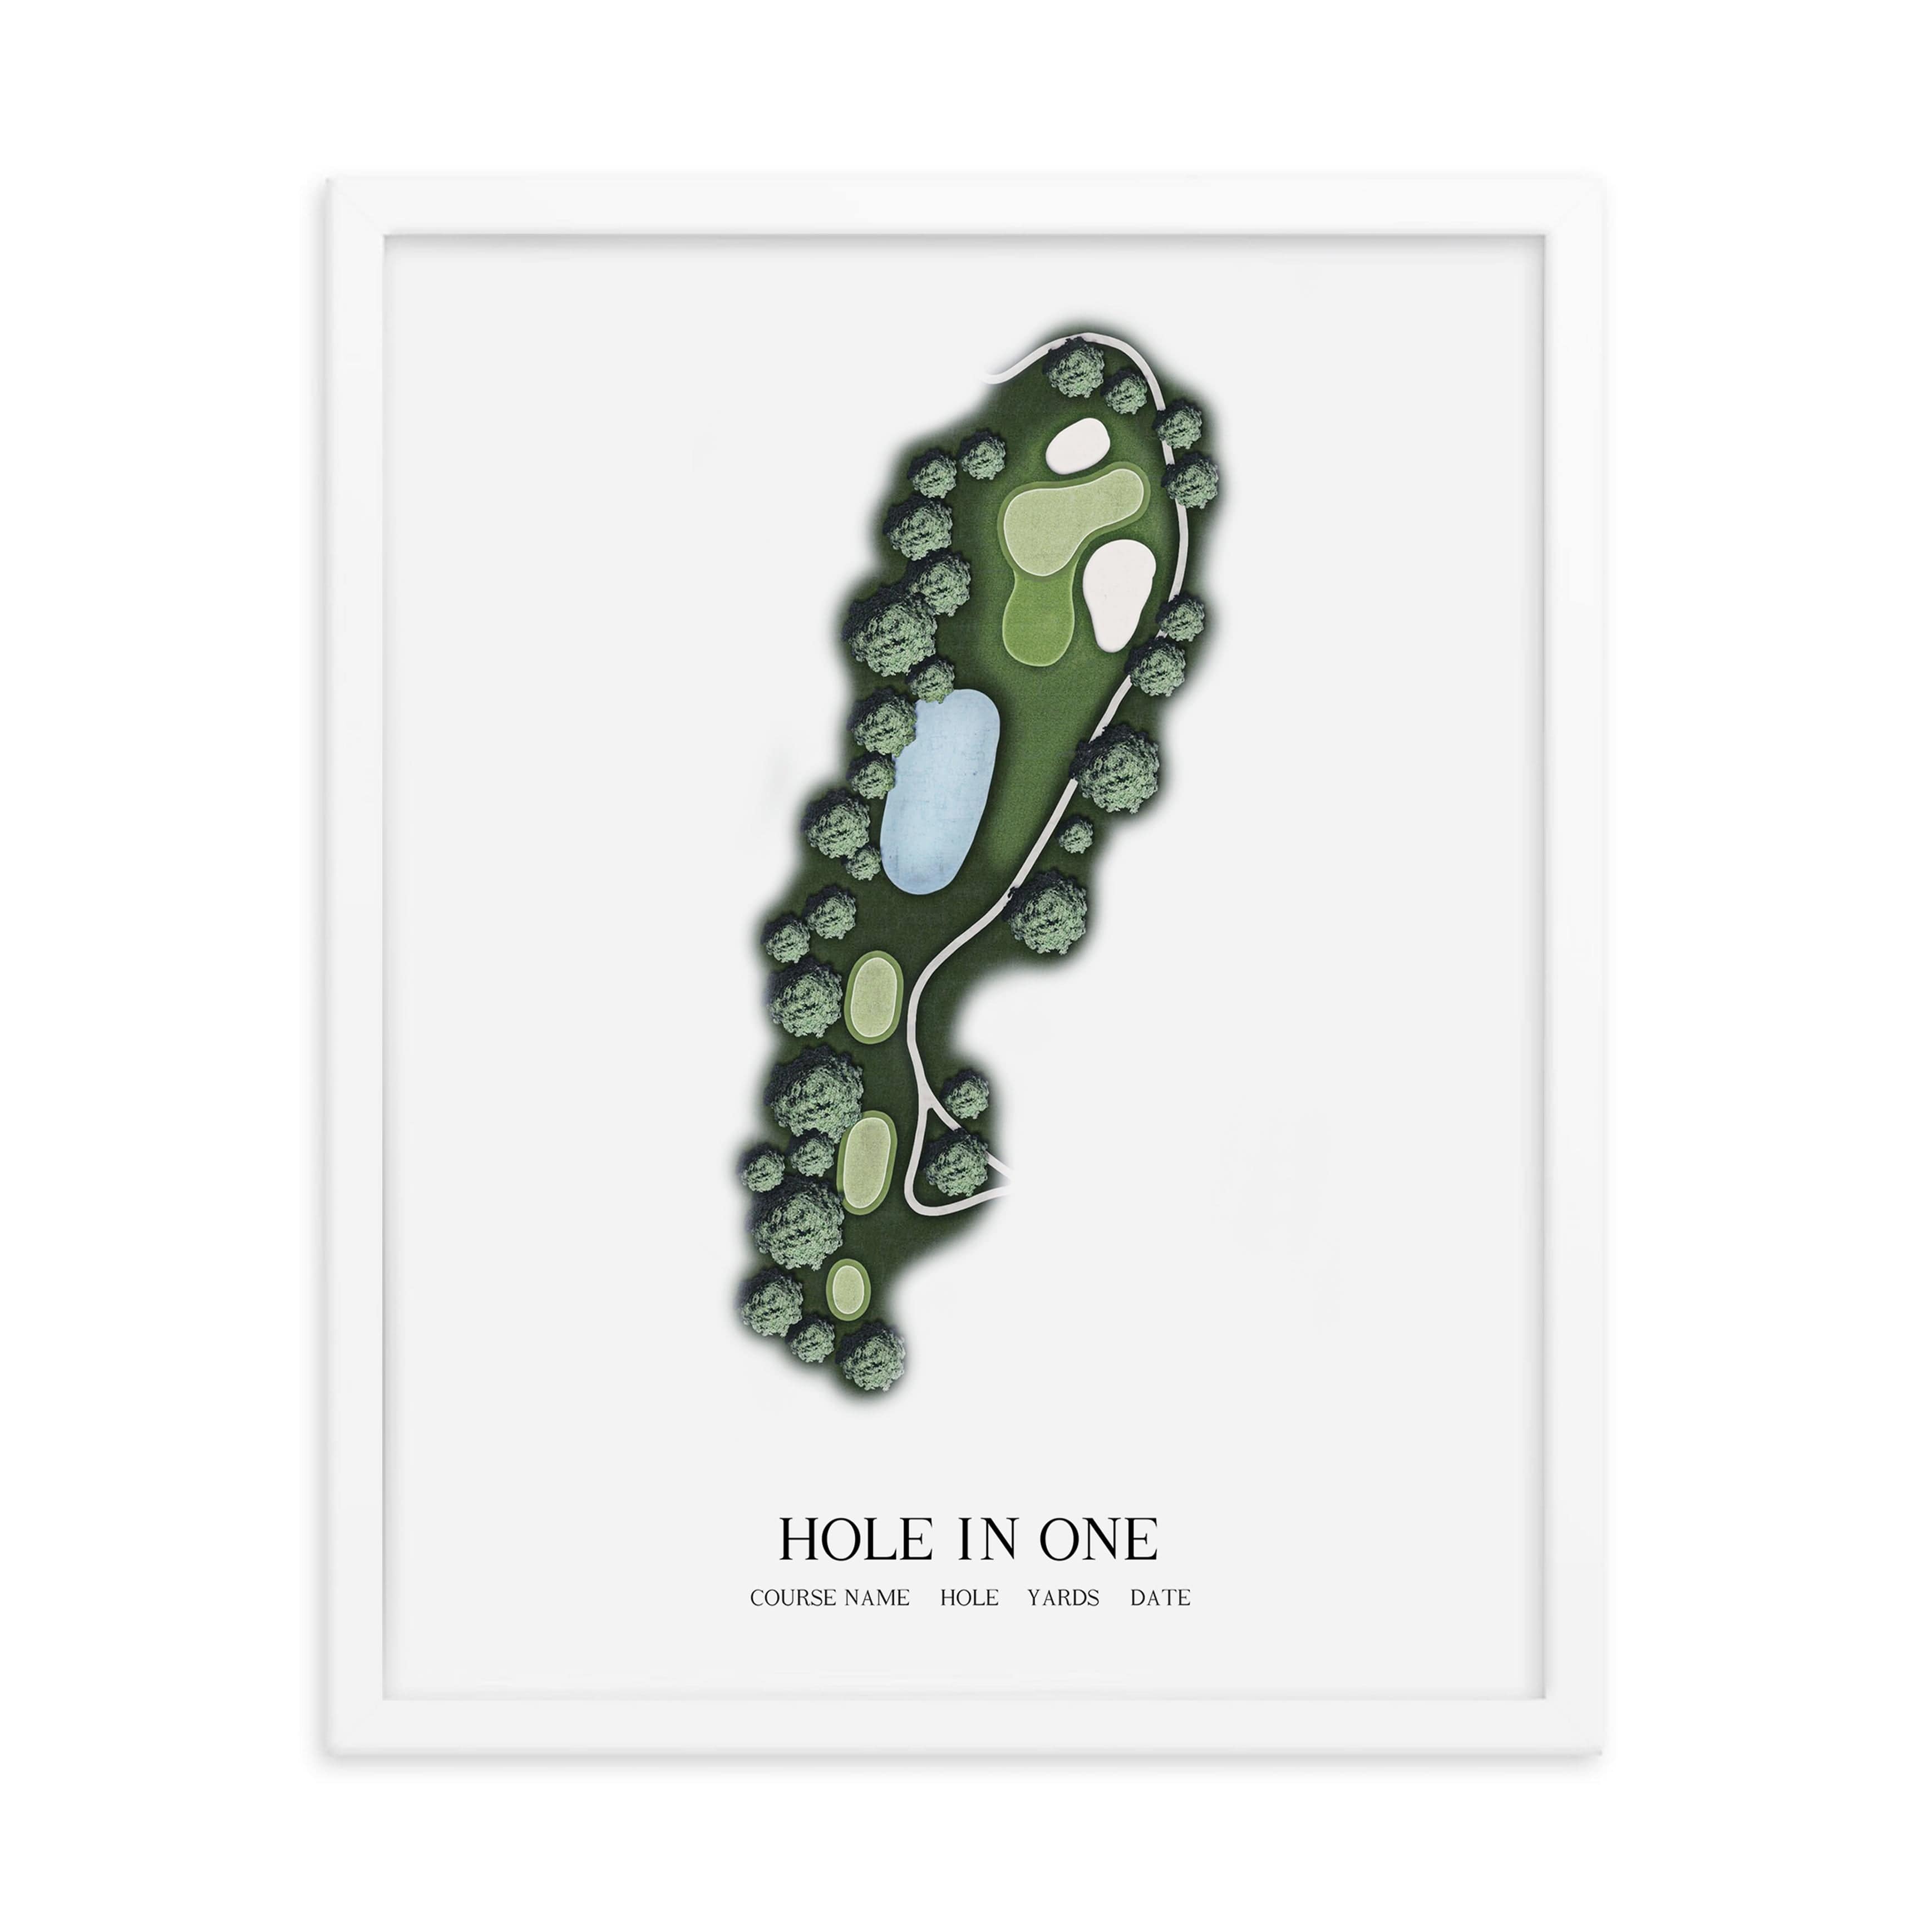 The 19th Hole Golf Shop - Golf Course Prints -  8" x 10" / White -Hole in One- Golf Course Map